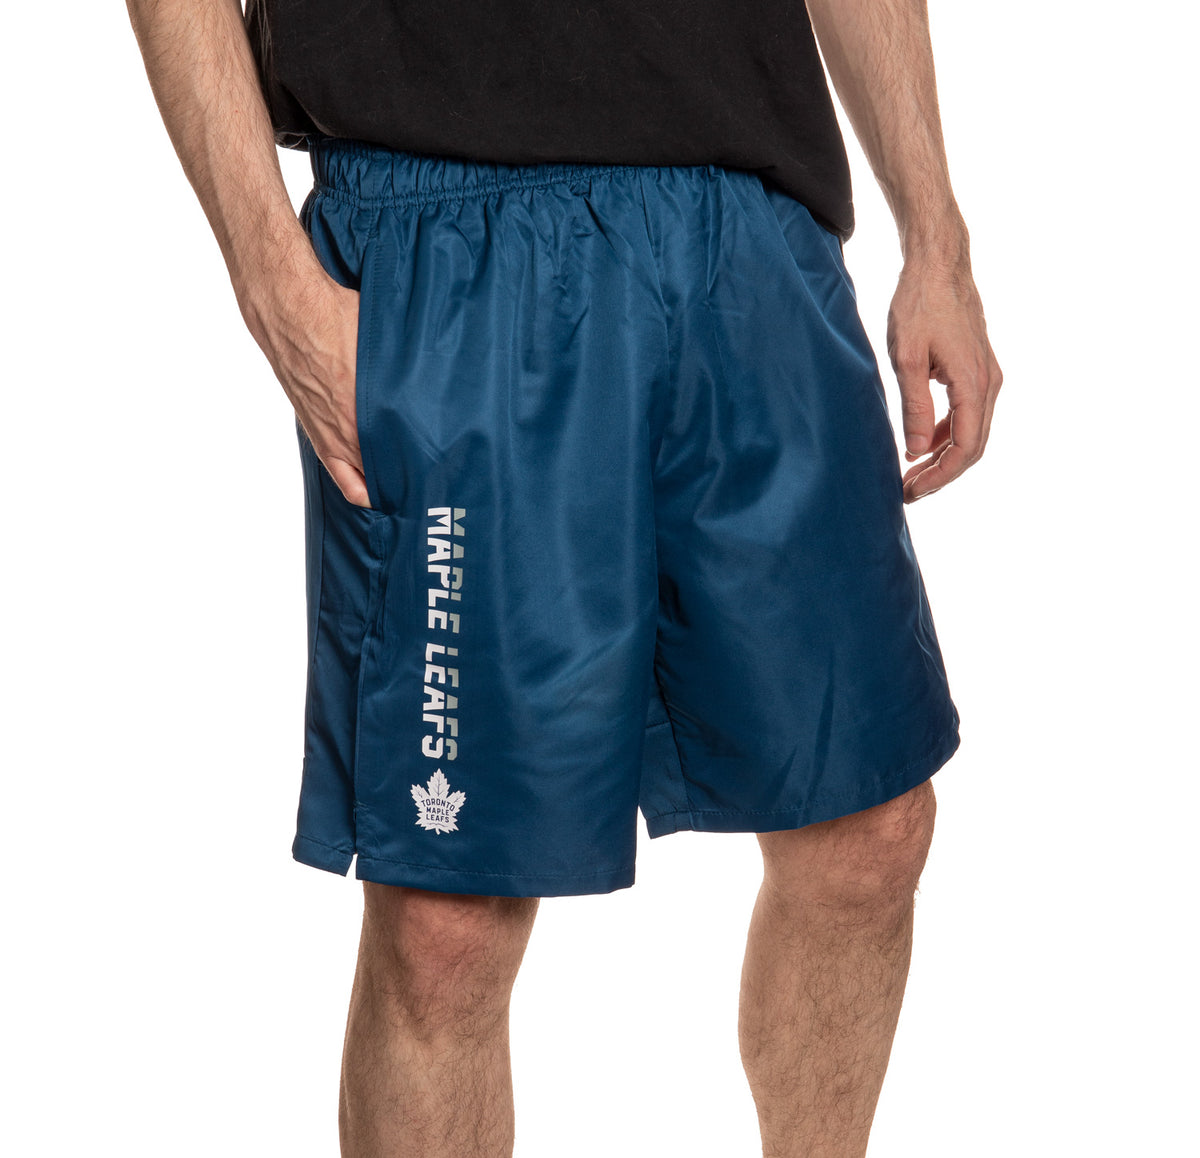 Toronto Maple Leafs Quick Drying Shorts for Men